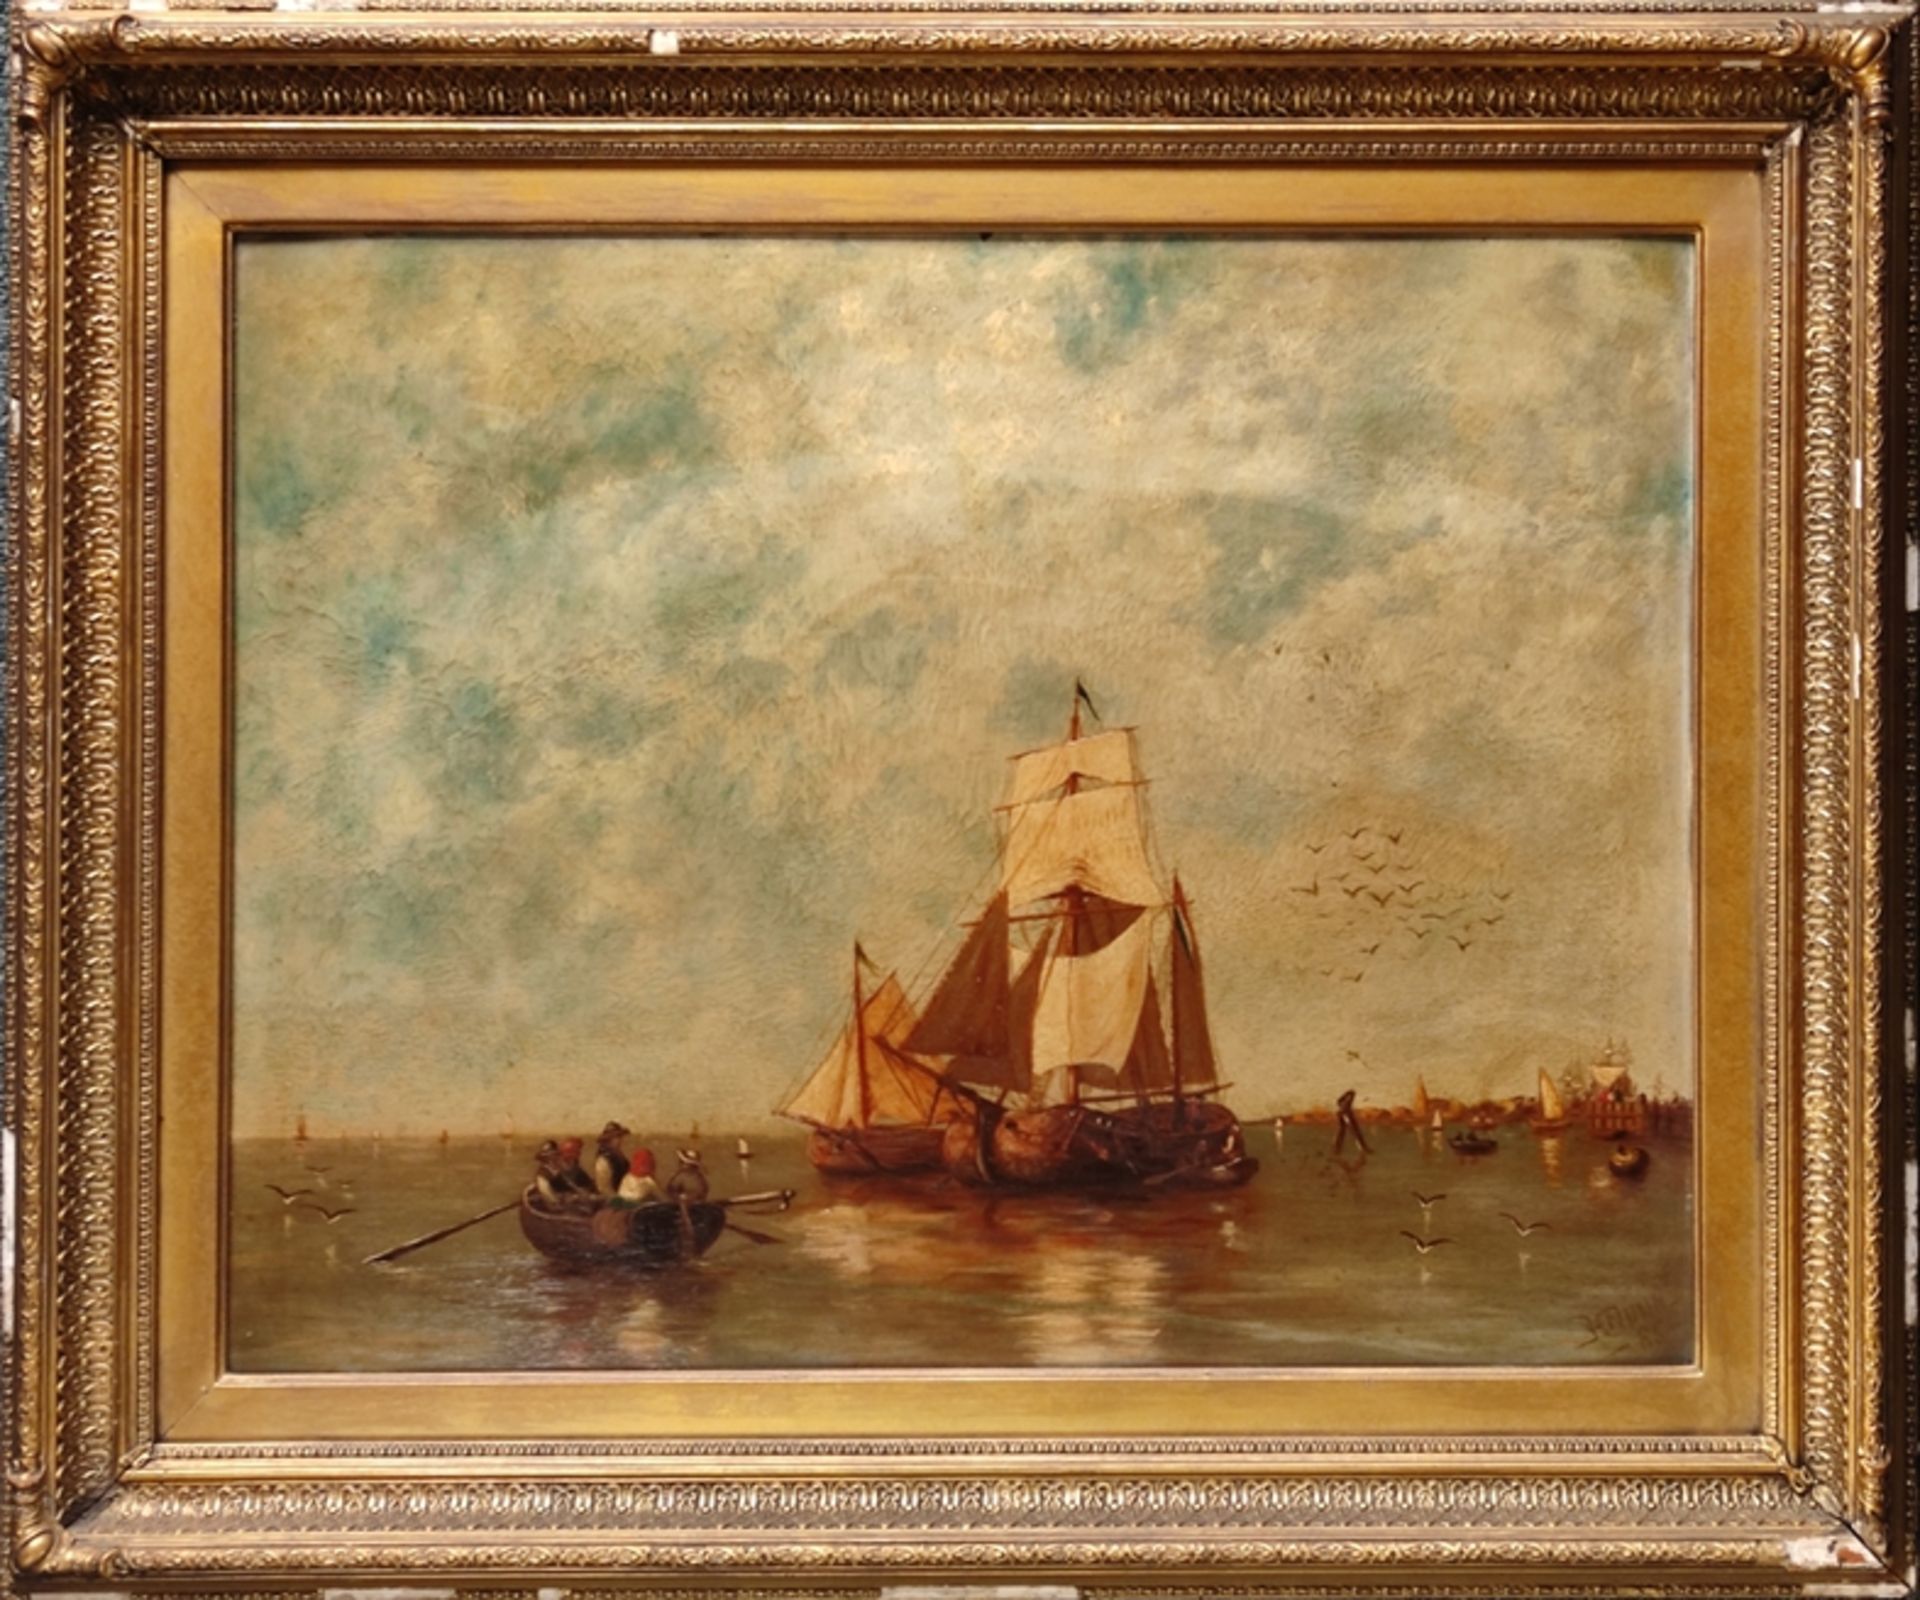 Nunn, H. (19th century) "Maritime Scene", with dinghies and moored sailboats, signed lower right "H - Image 2 of 4